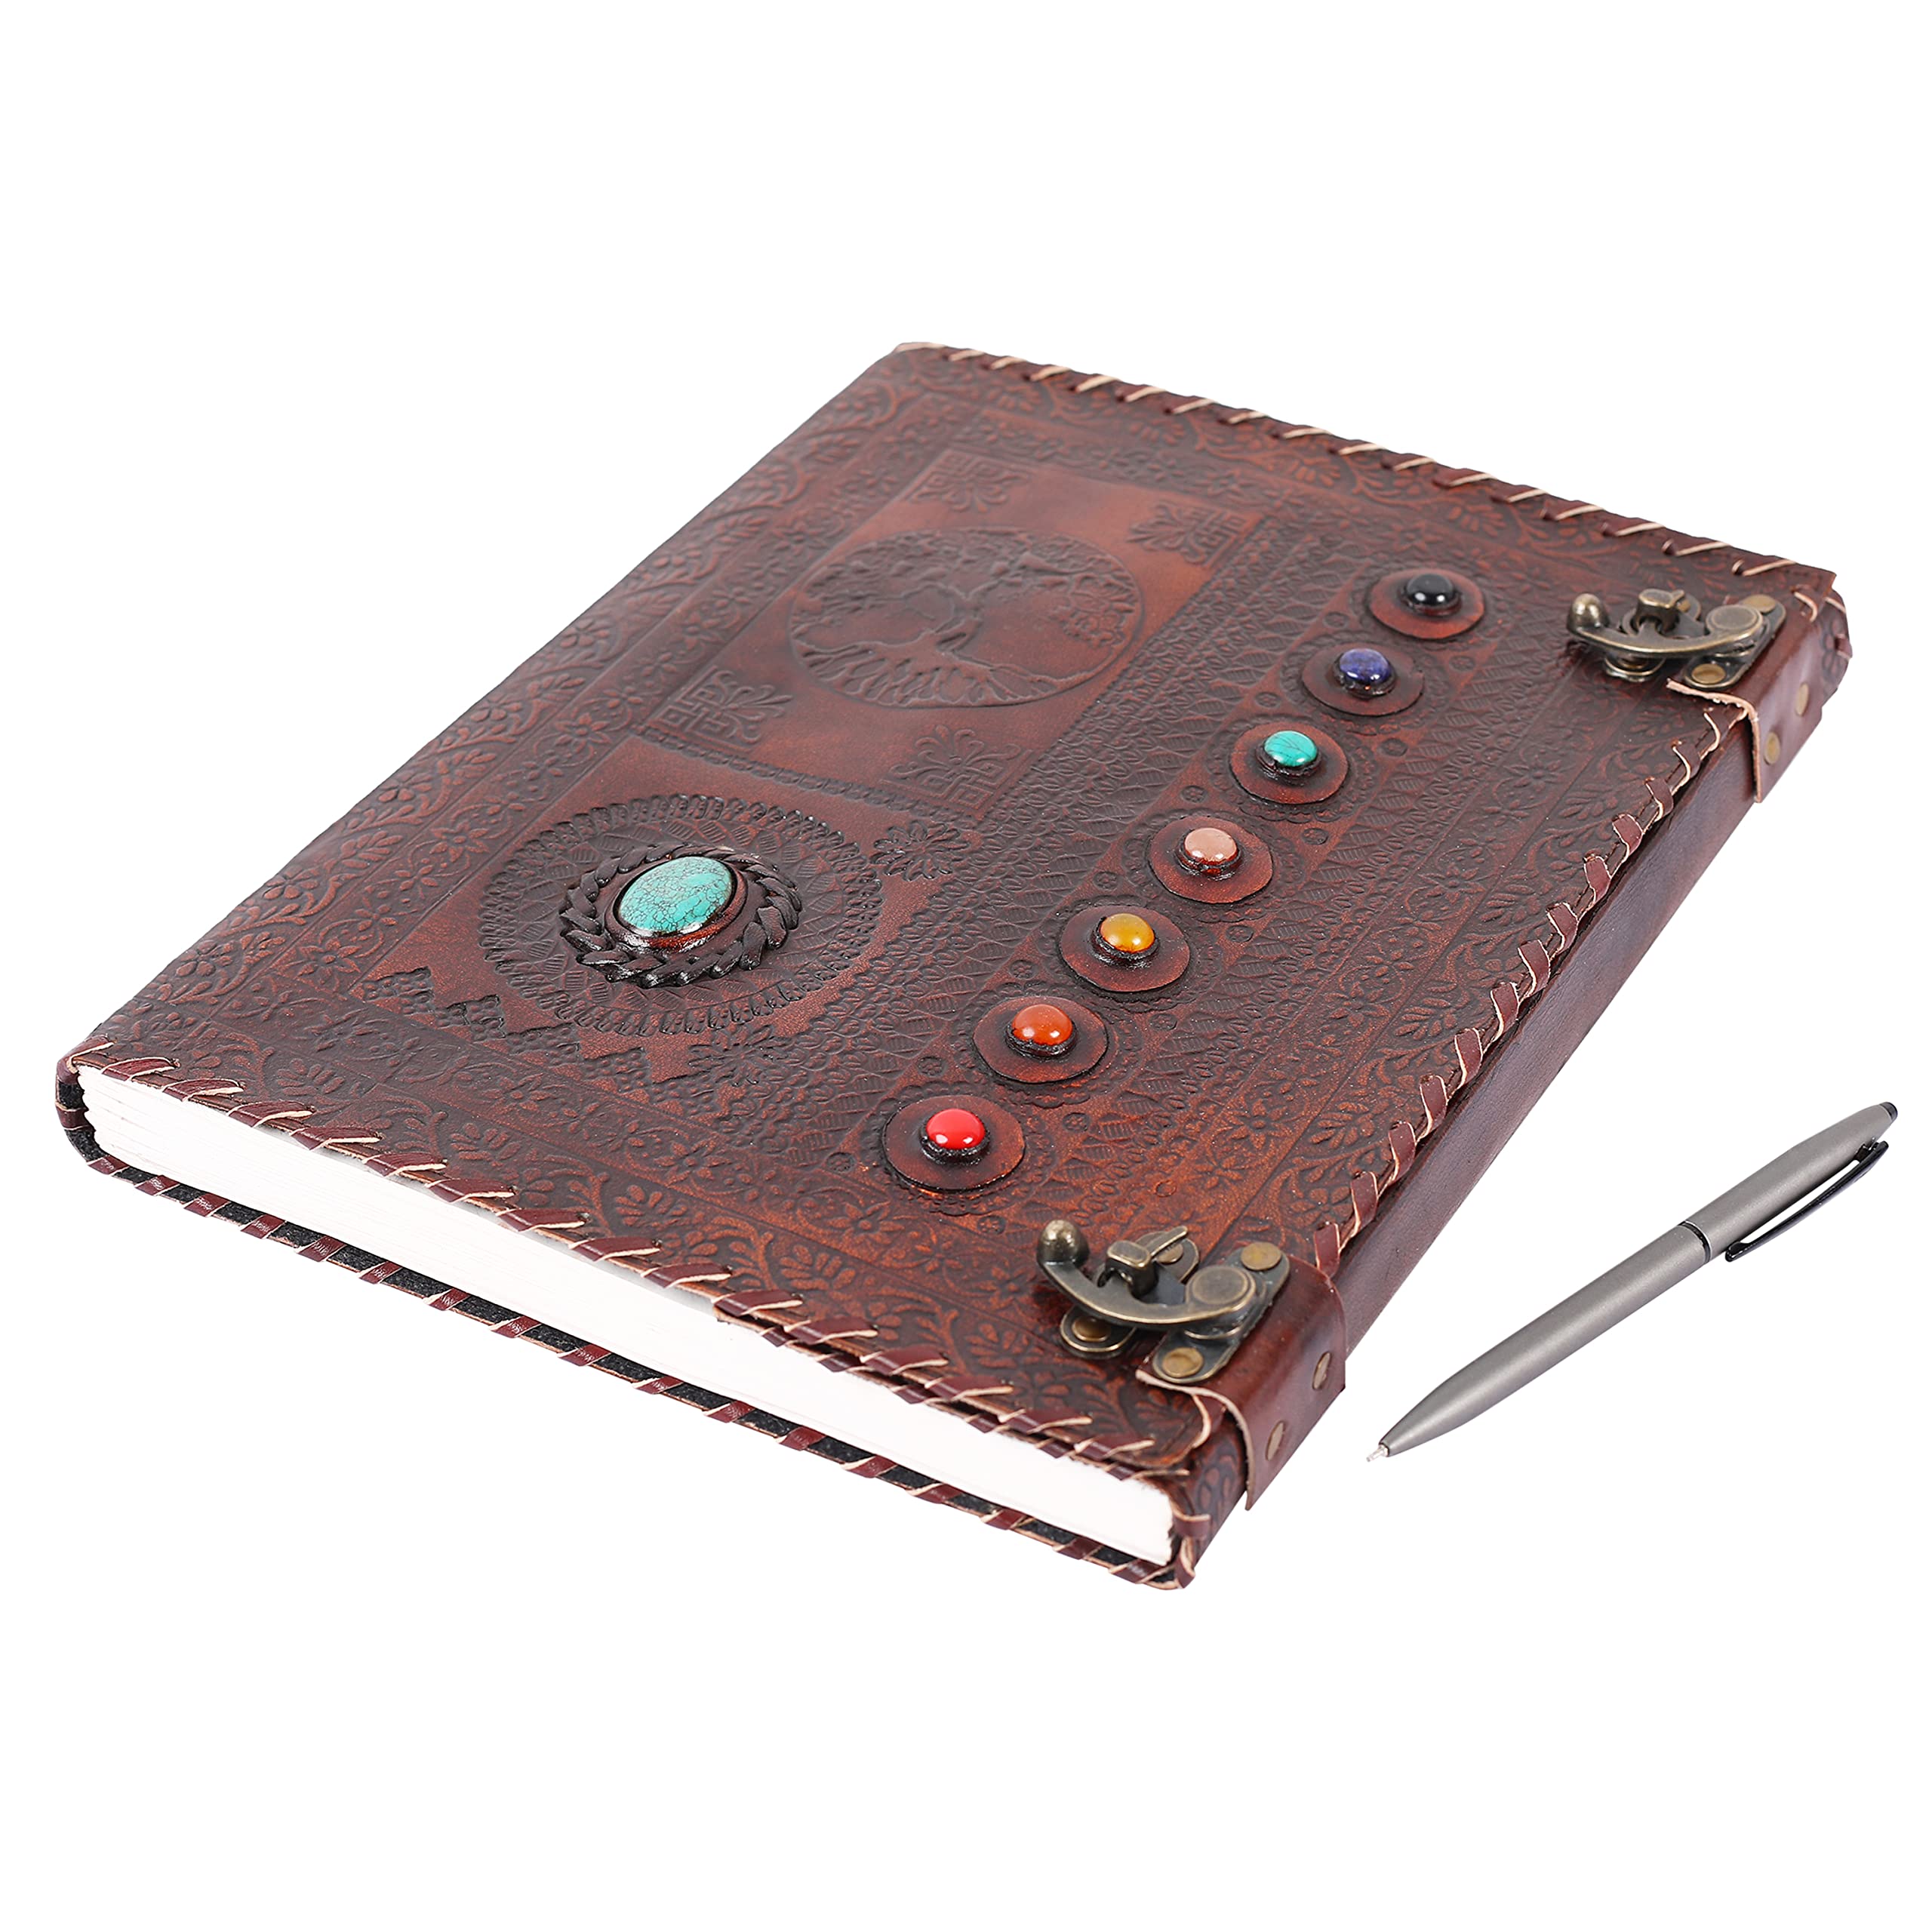 OVERDOSE Tree with 8 Stone Vintage Leather Journal - Handmade Antique Journal For Students & Office For Men Women Diary Leather Sketchbook Drawing - Size 10 X 13 Inches | 25 X 33 cm